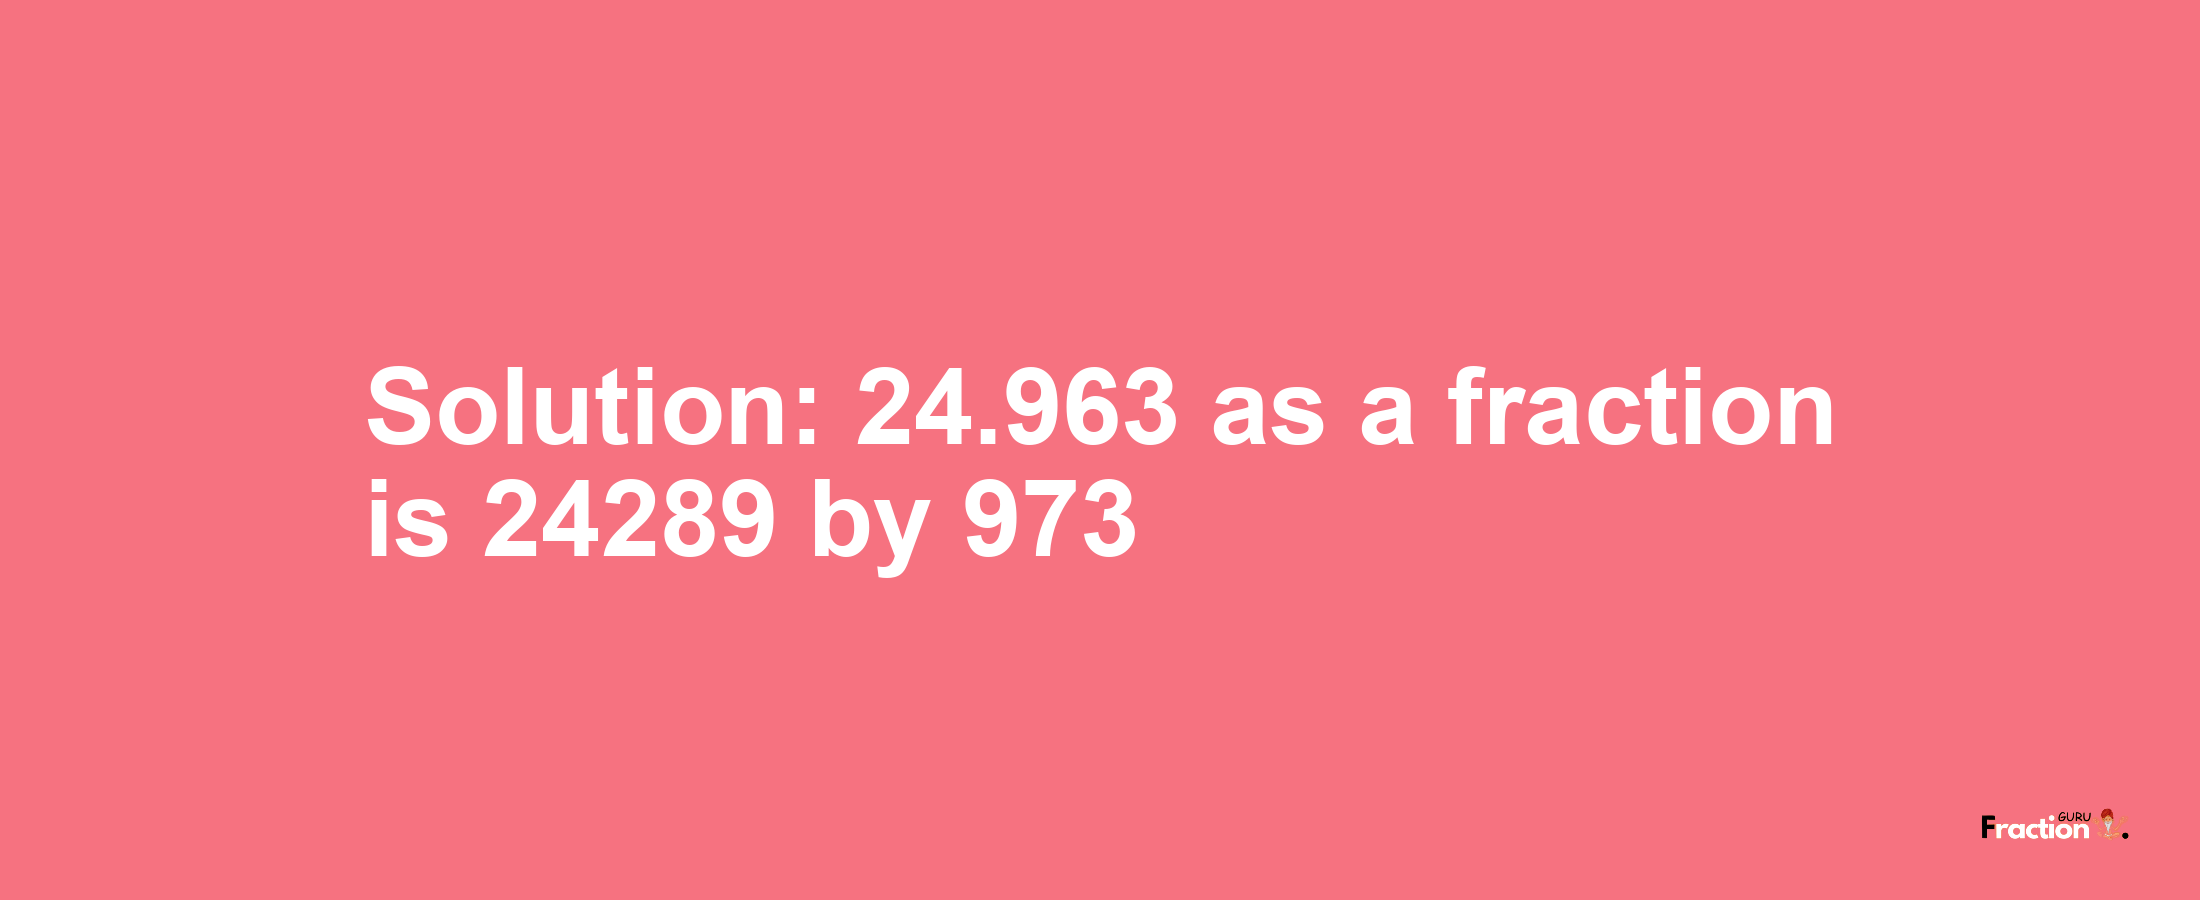 Solution:24.963 as a fraction is 24289/973